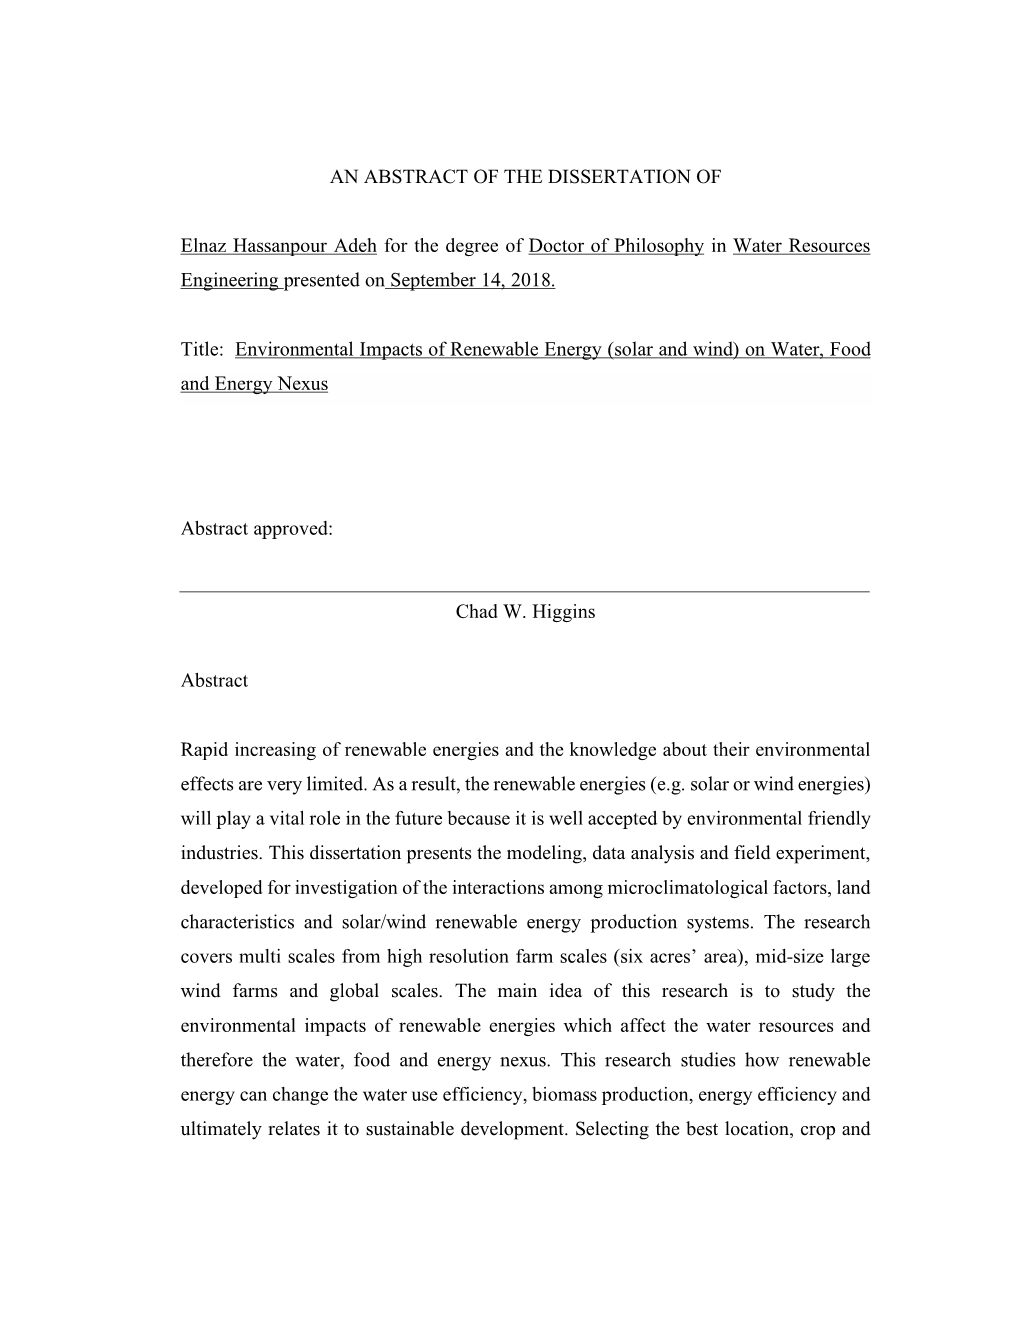 AN ABSTRACT of the DISSERTATION of Elnaz